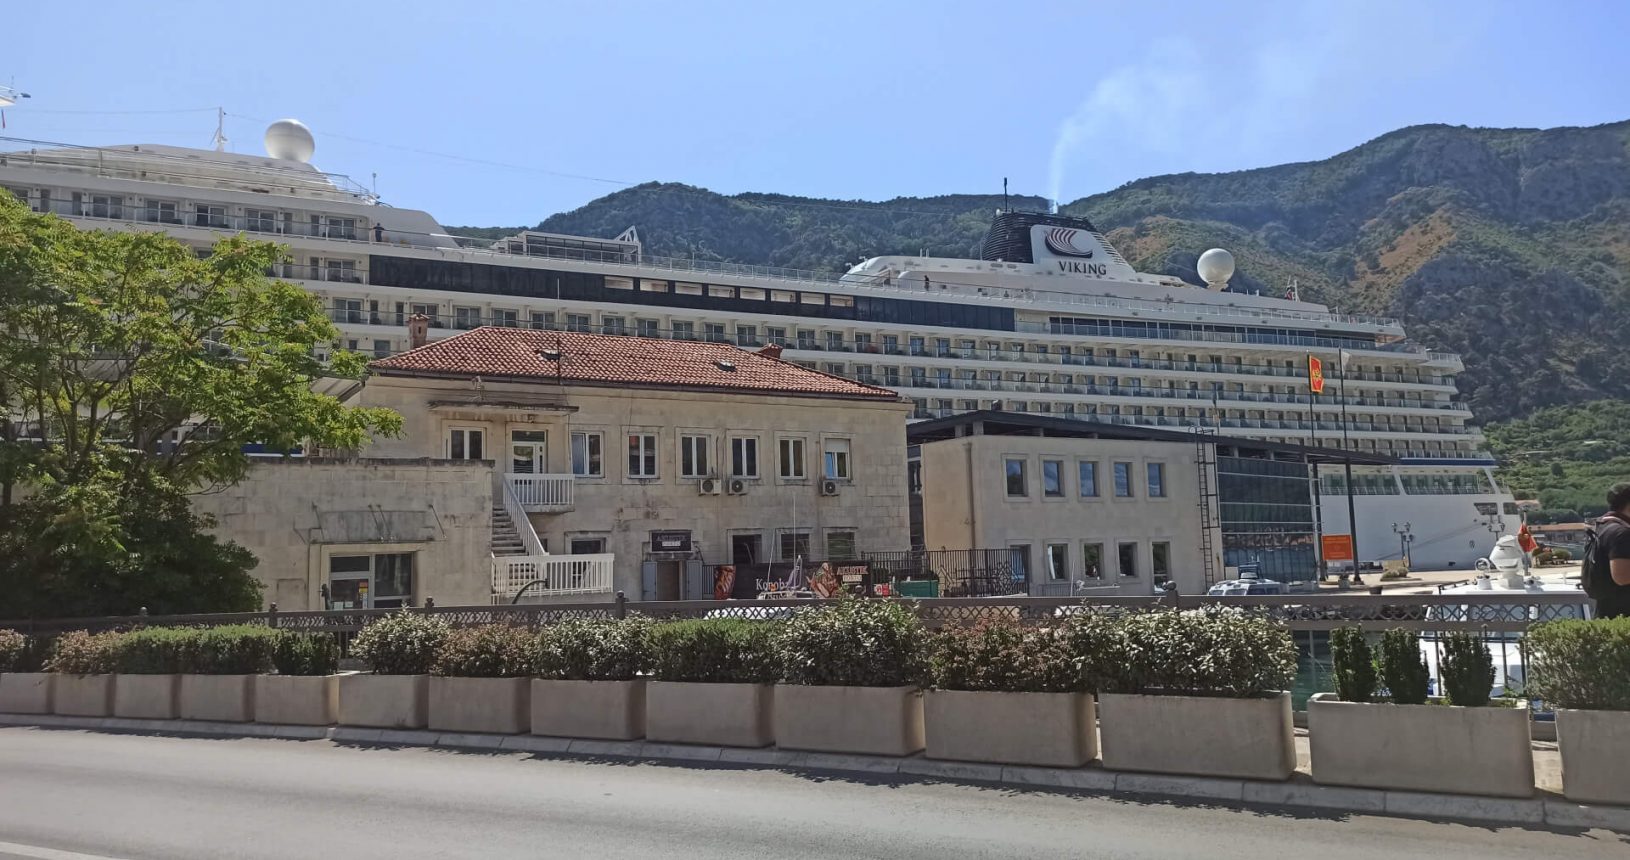 Cruise ship from the center of the city Kotor